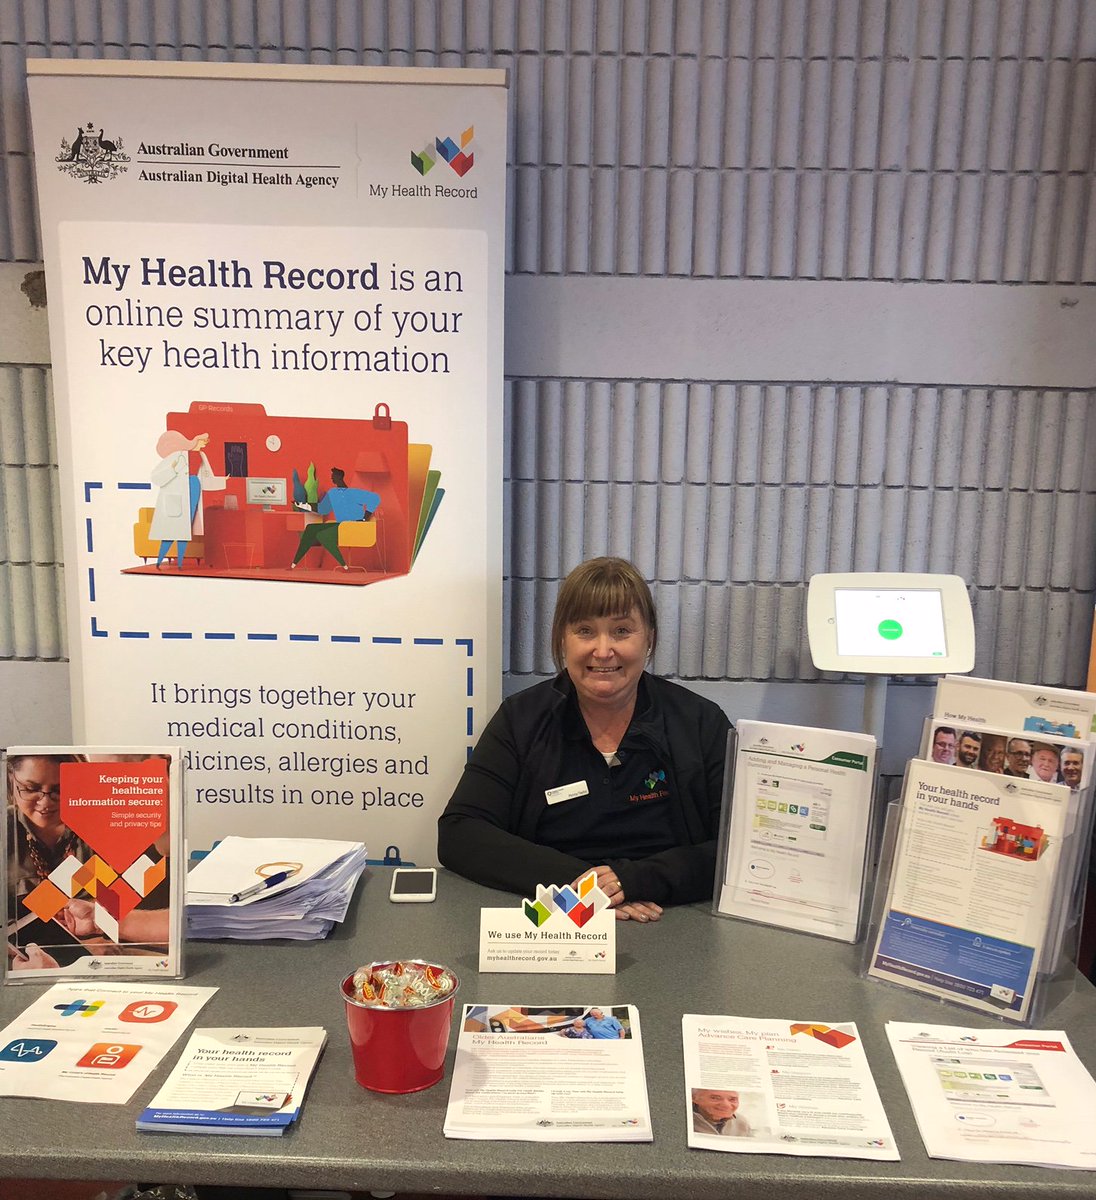 We're at #HomelessConnect @NorthsideACT where people experiencing homelessness are being connected with practical service provision & support. We’re chatting about the benefits of #MyHealthRecord @MyHealthRec during #HomelessnessWeek #PHN